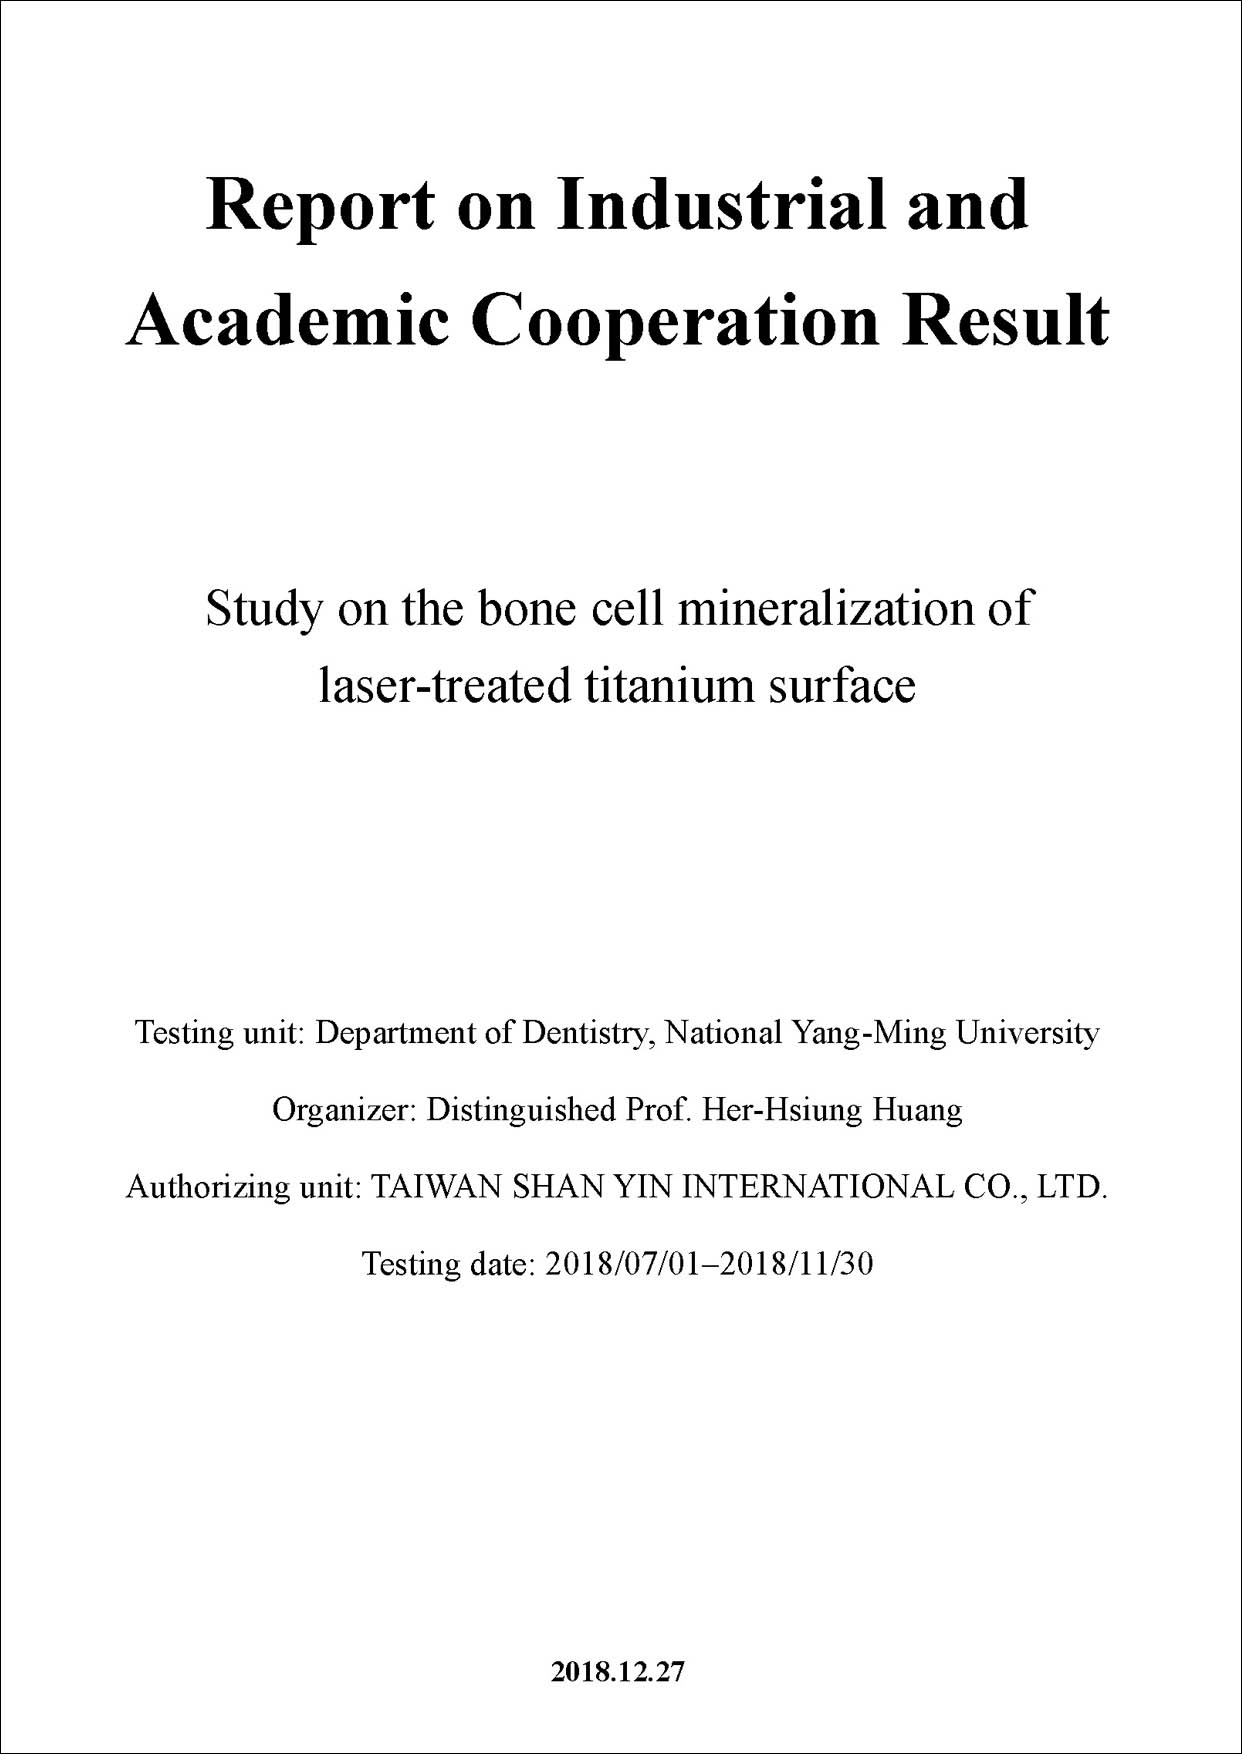 Study on the bone cell mineralization of laser-treated titanium surface